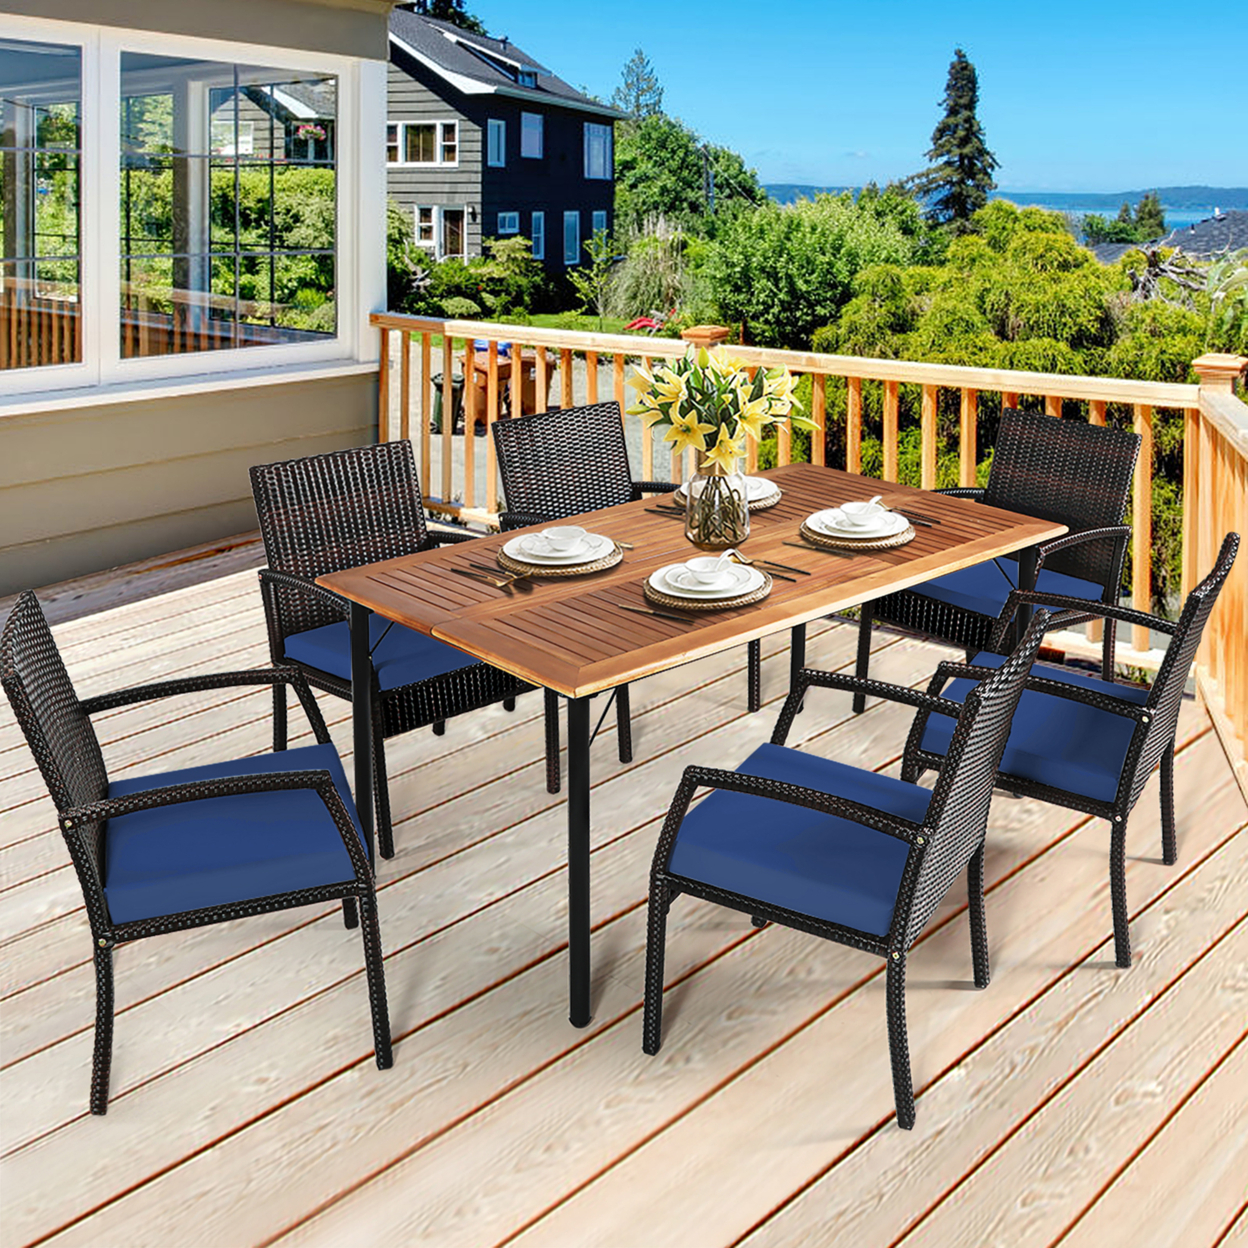 7PCS Patio Dining Furniture Set Yard W/ Wooden Tabletop Navy Cushions